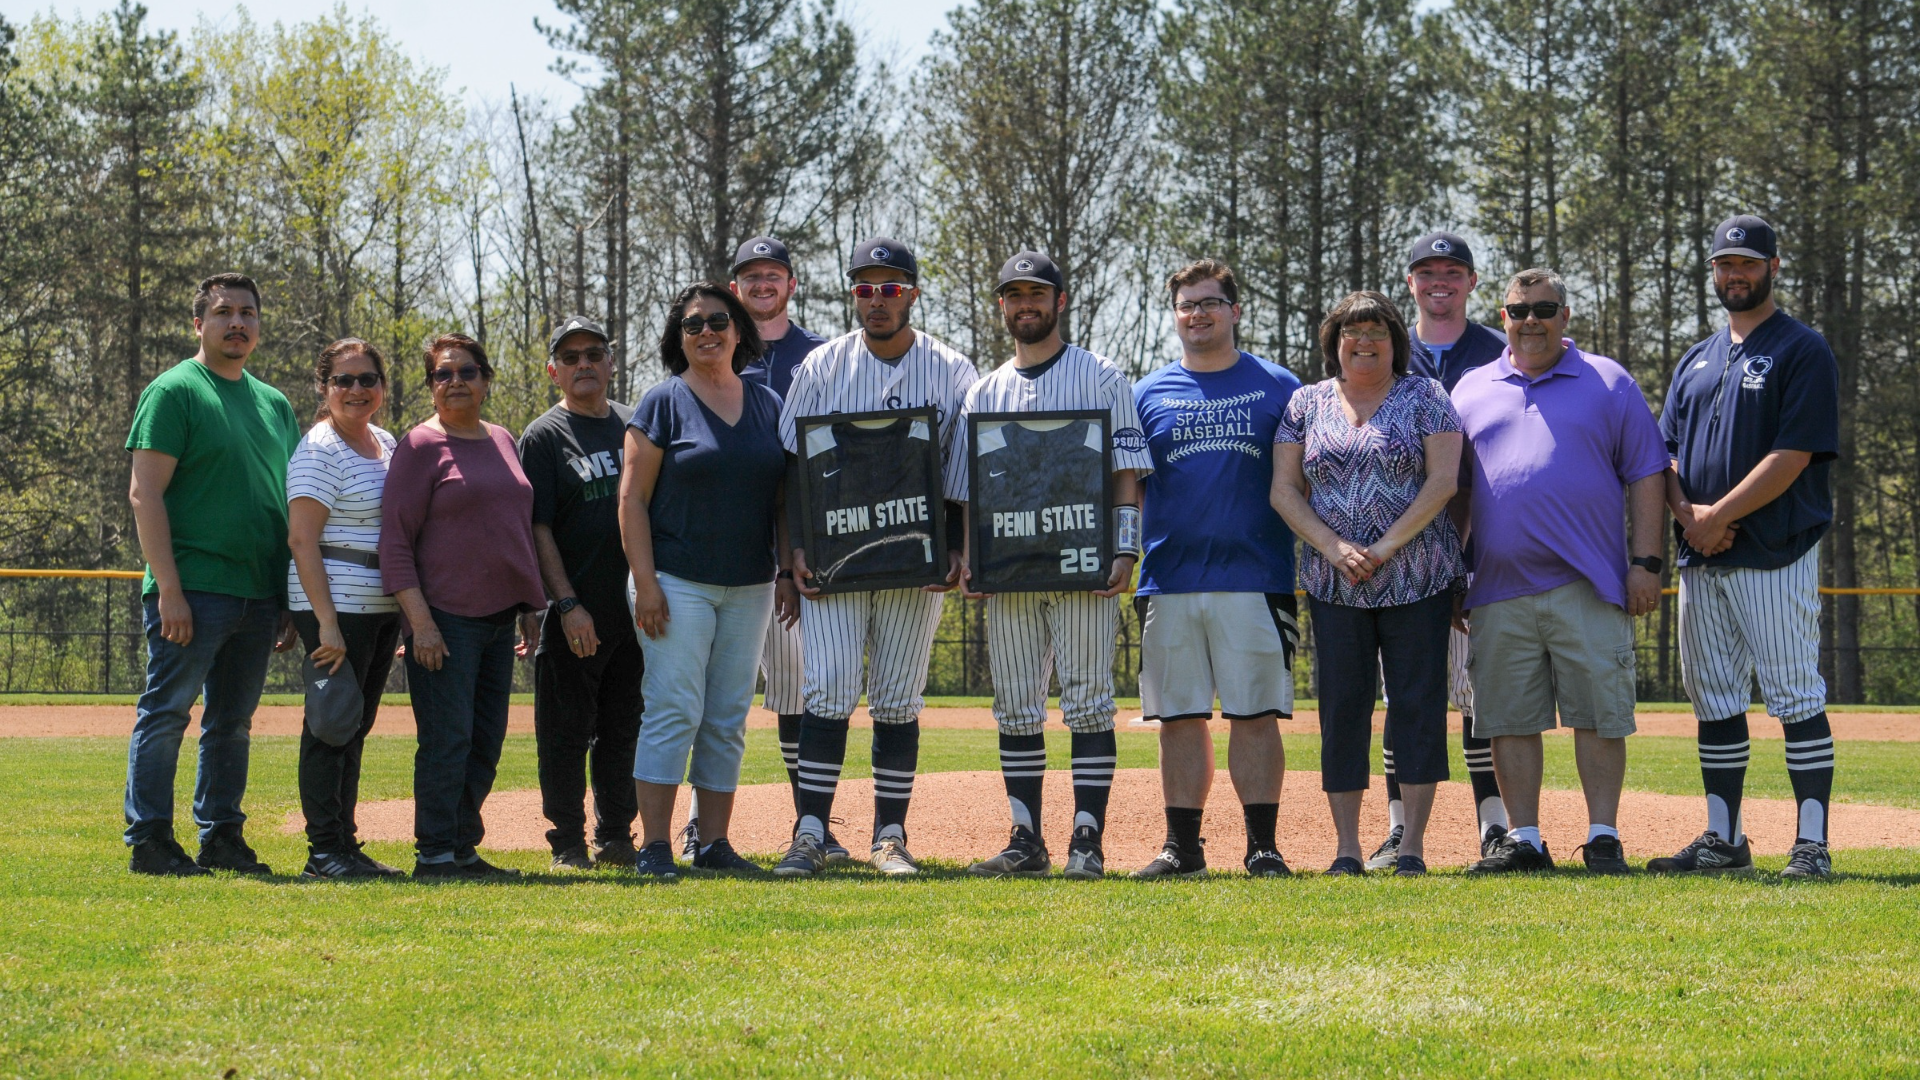 Seniors Mark Longo and Justin Craigg stand at the mound with their families and coaches before Friday's doubleheader.